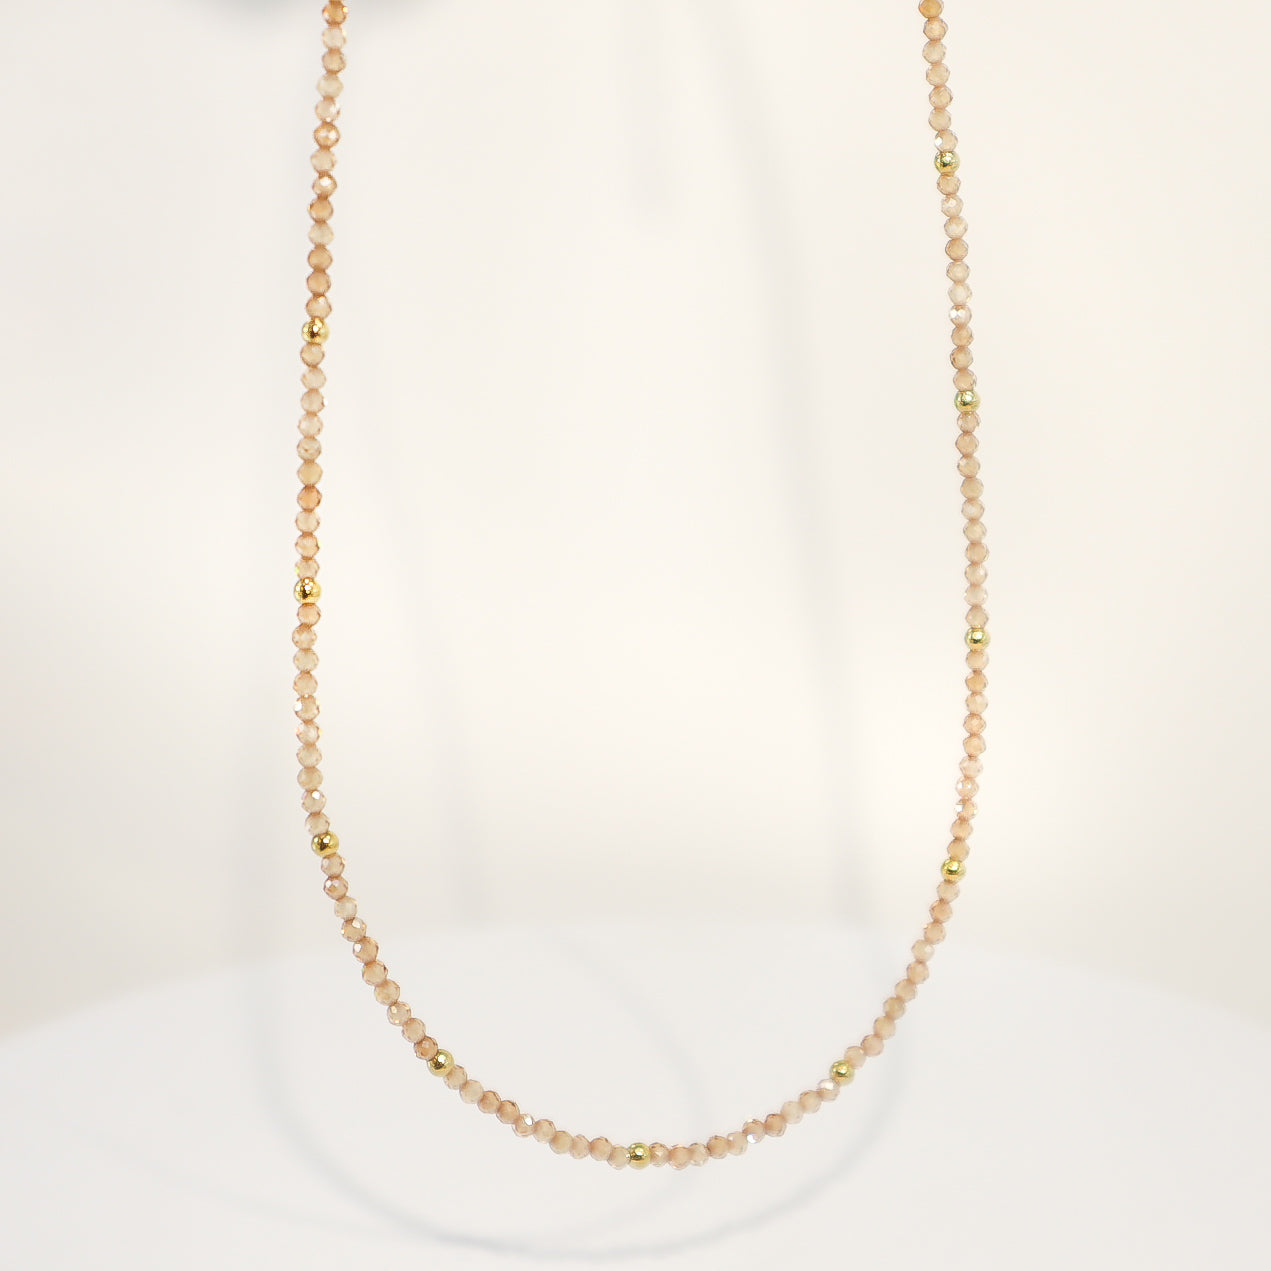 Tan & Gold Crystal Necklace